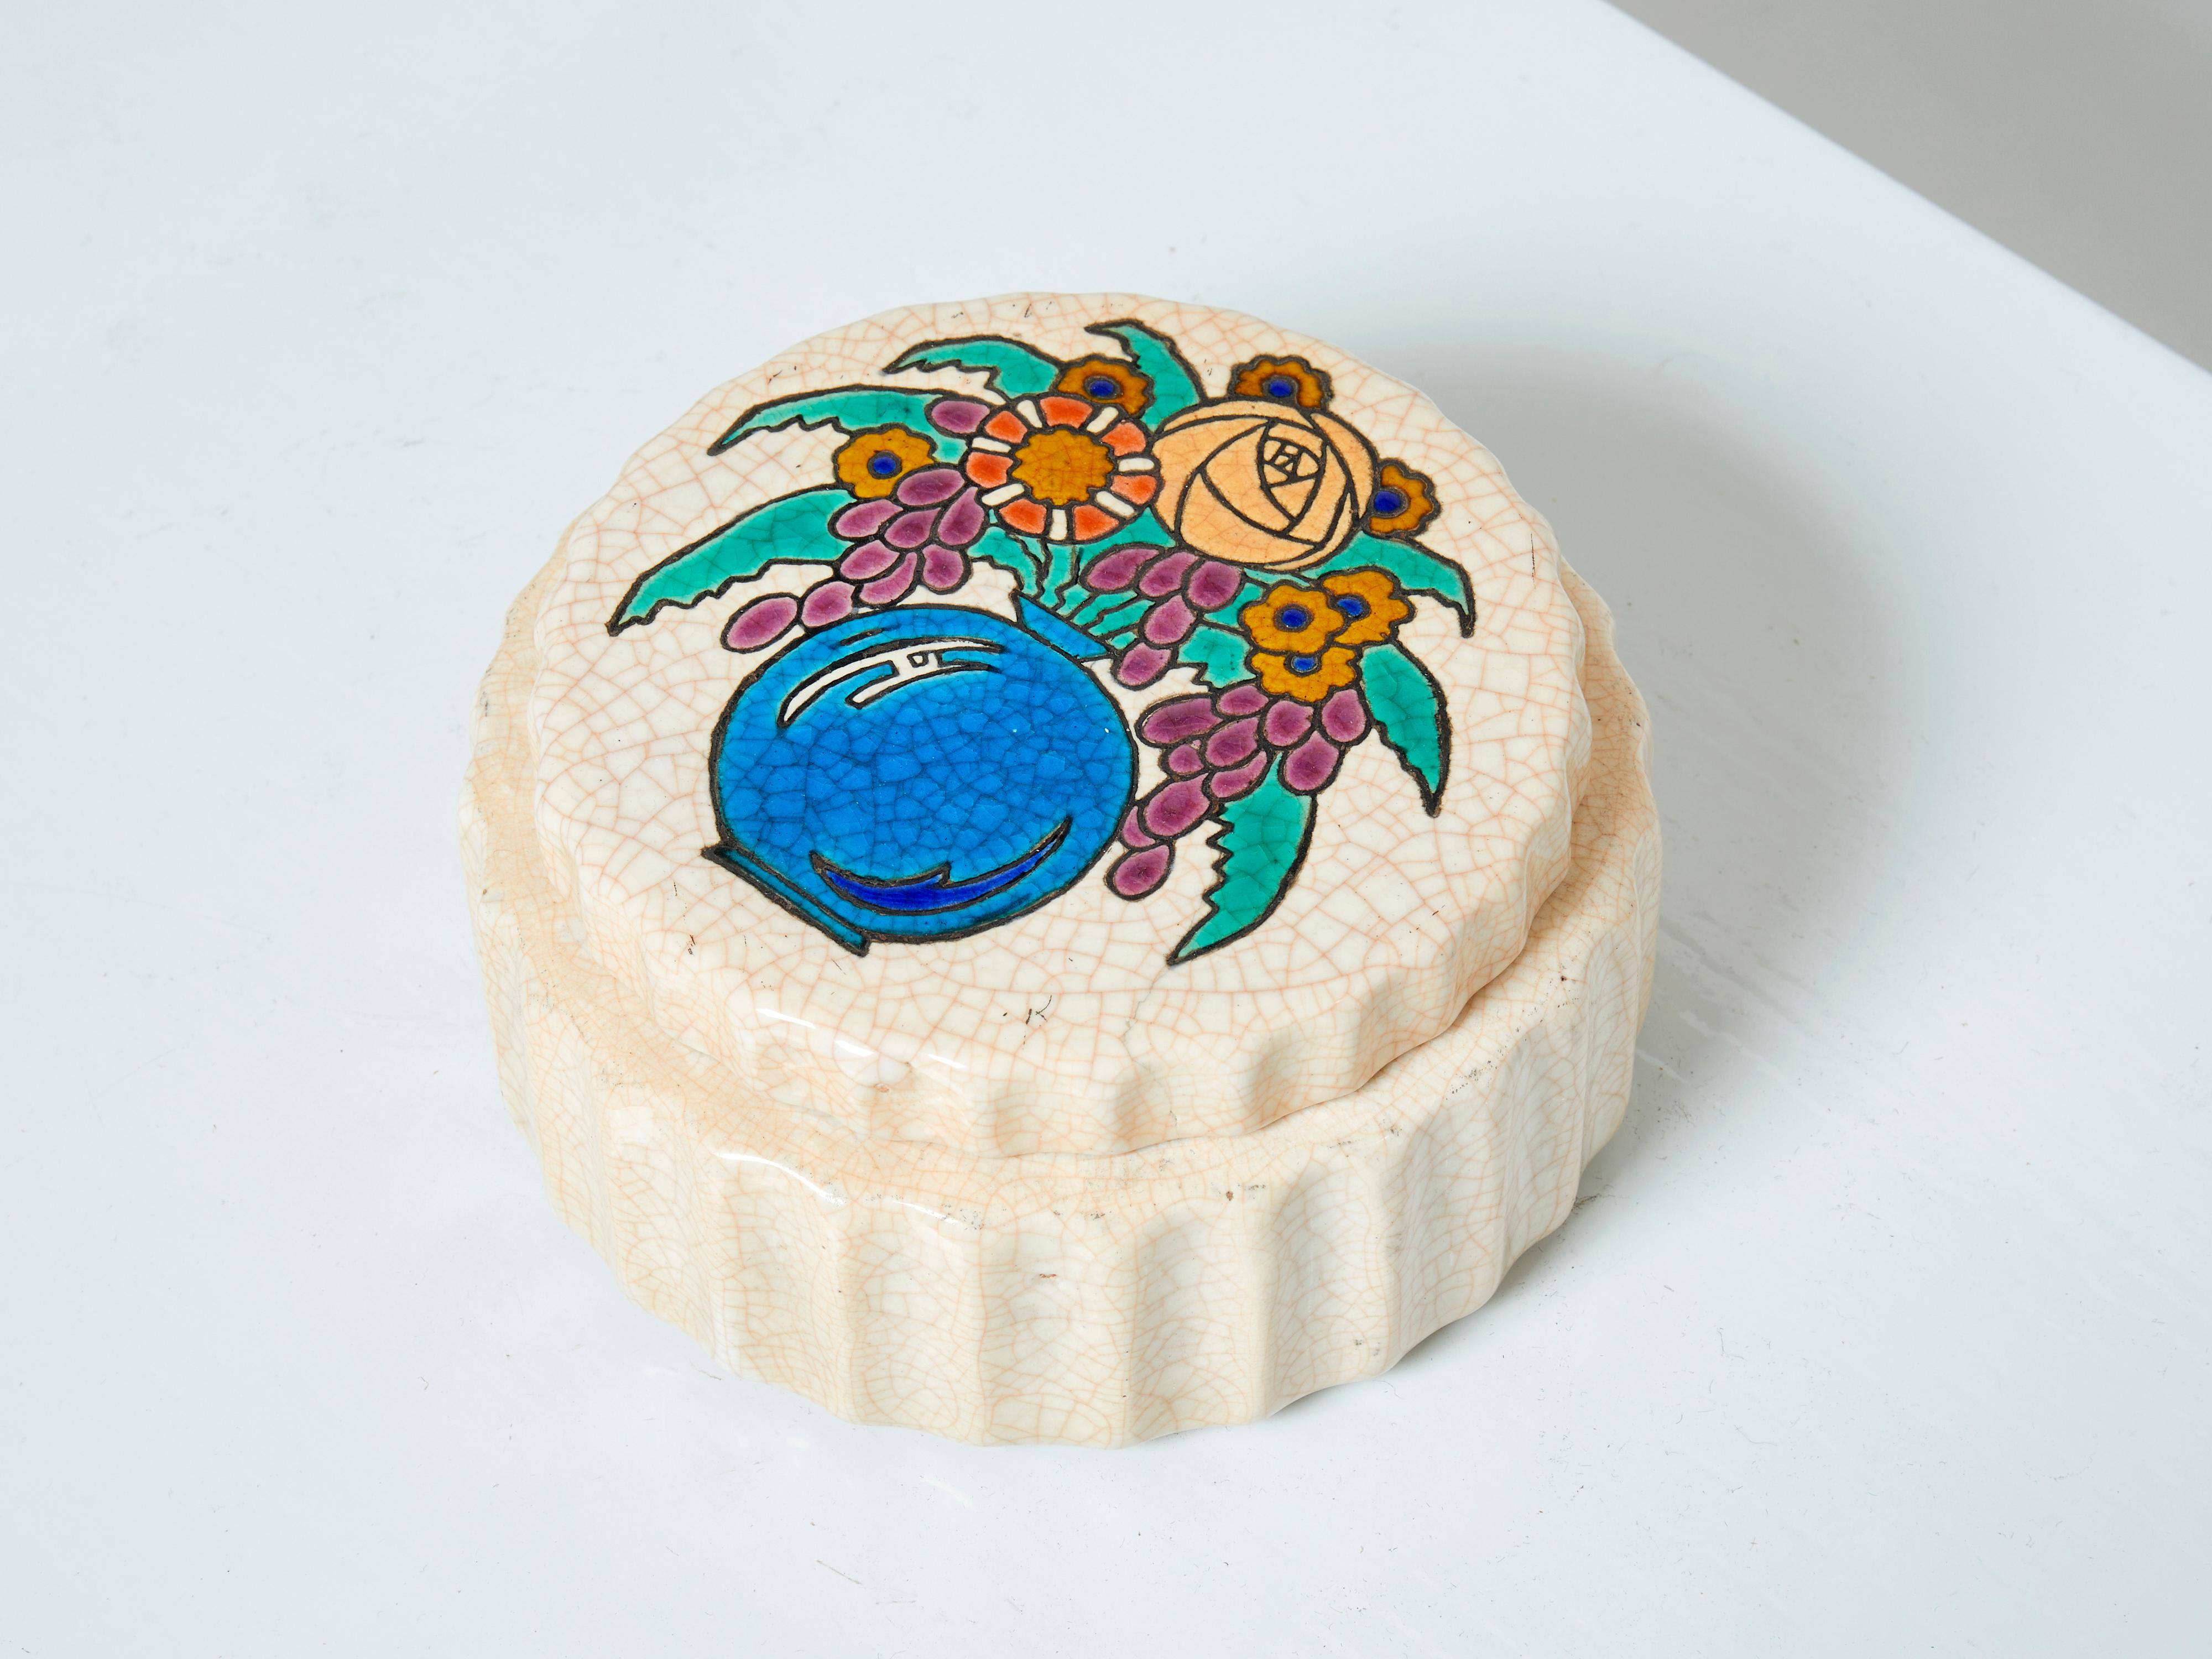 Rare large ceramic Art deco fluted round box by Faïenceries et Emaux de Longwy made around 1930. This beautiful box features a colourful vase with flowers. The cream beige features Longwy's signature craquelure glaze. The Longwy manufacture has